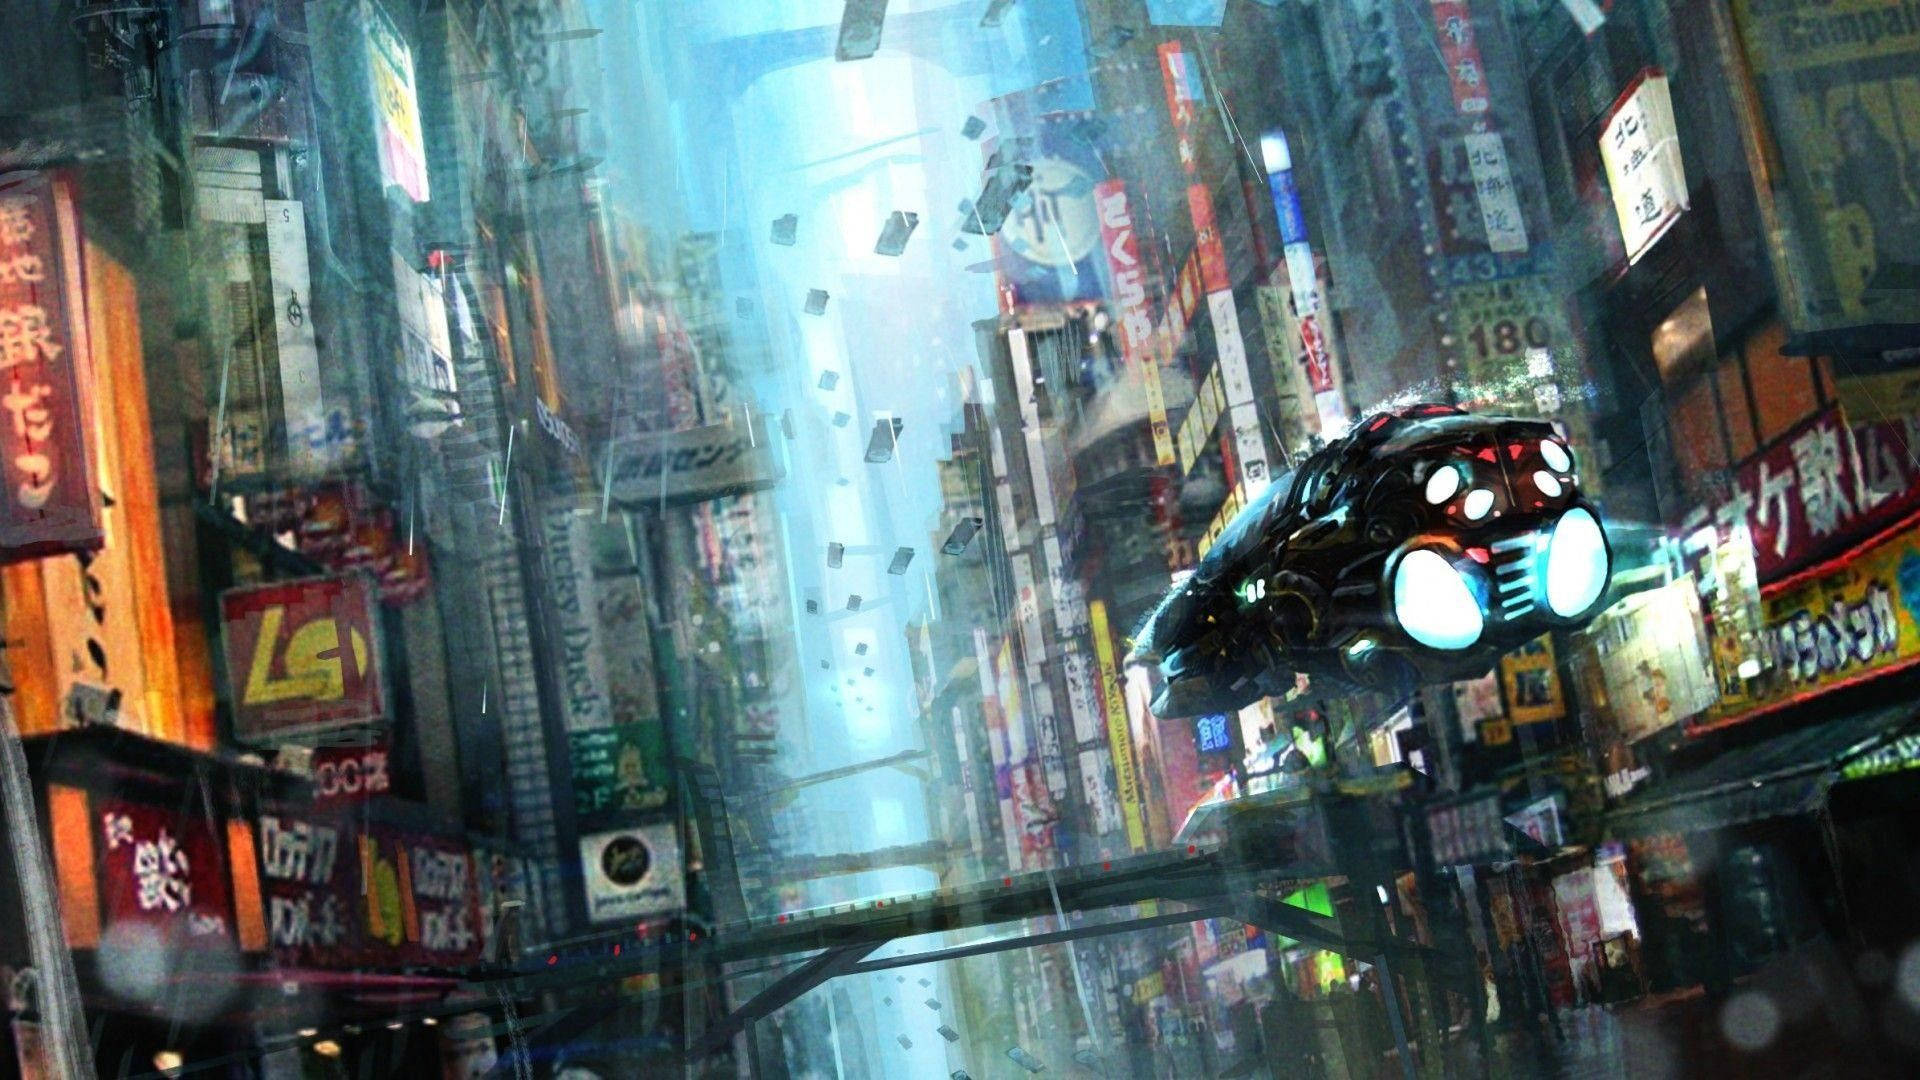 Blade Runner Futuristic City Flying Cars Background